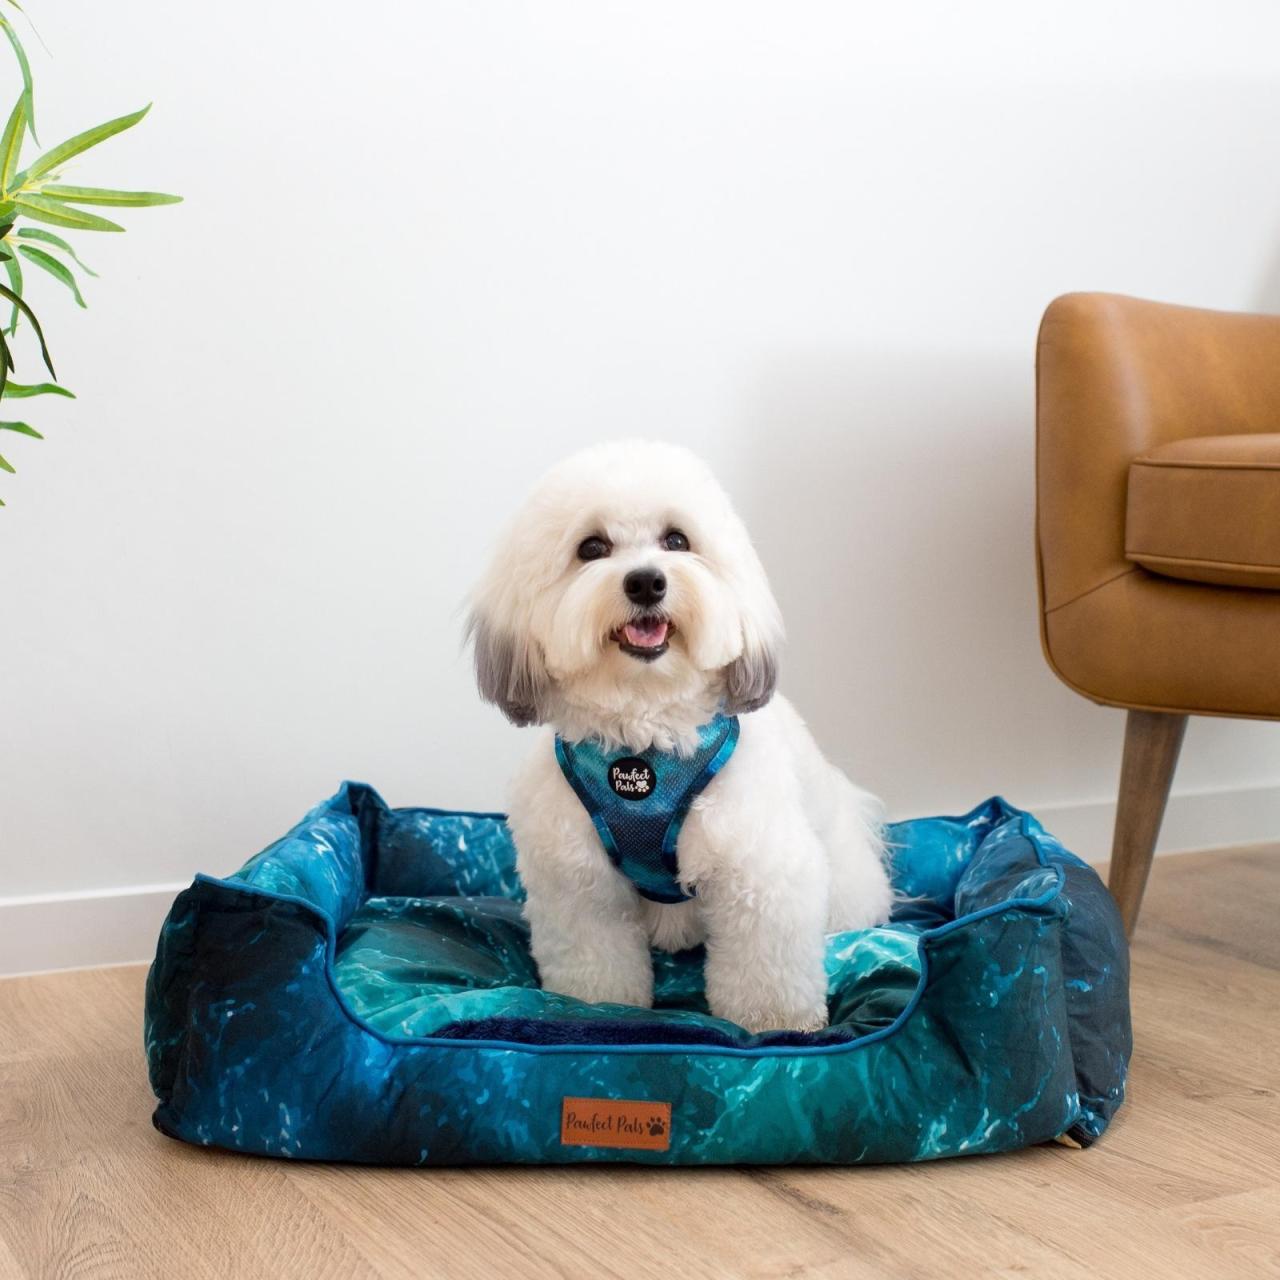 Bunnings dog bed